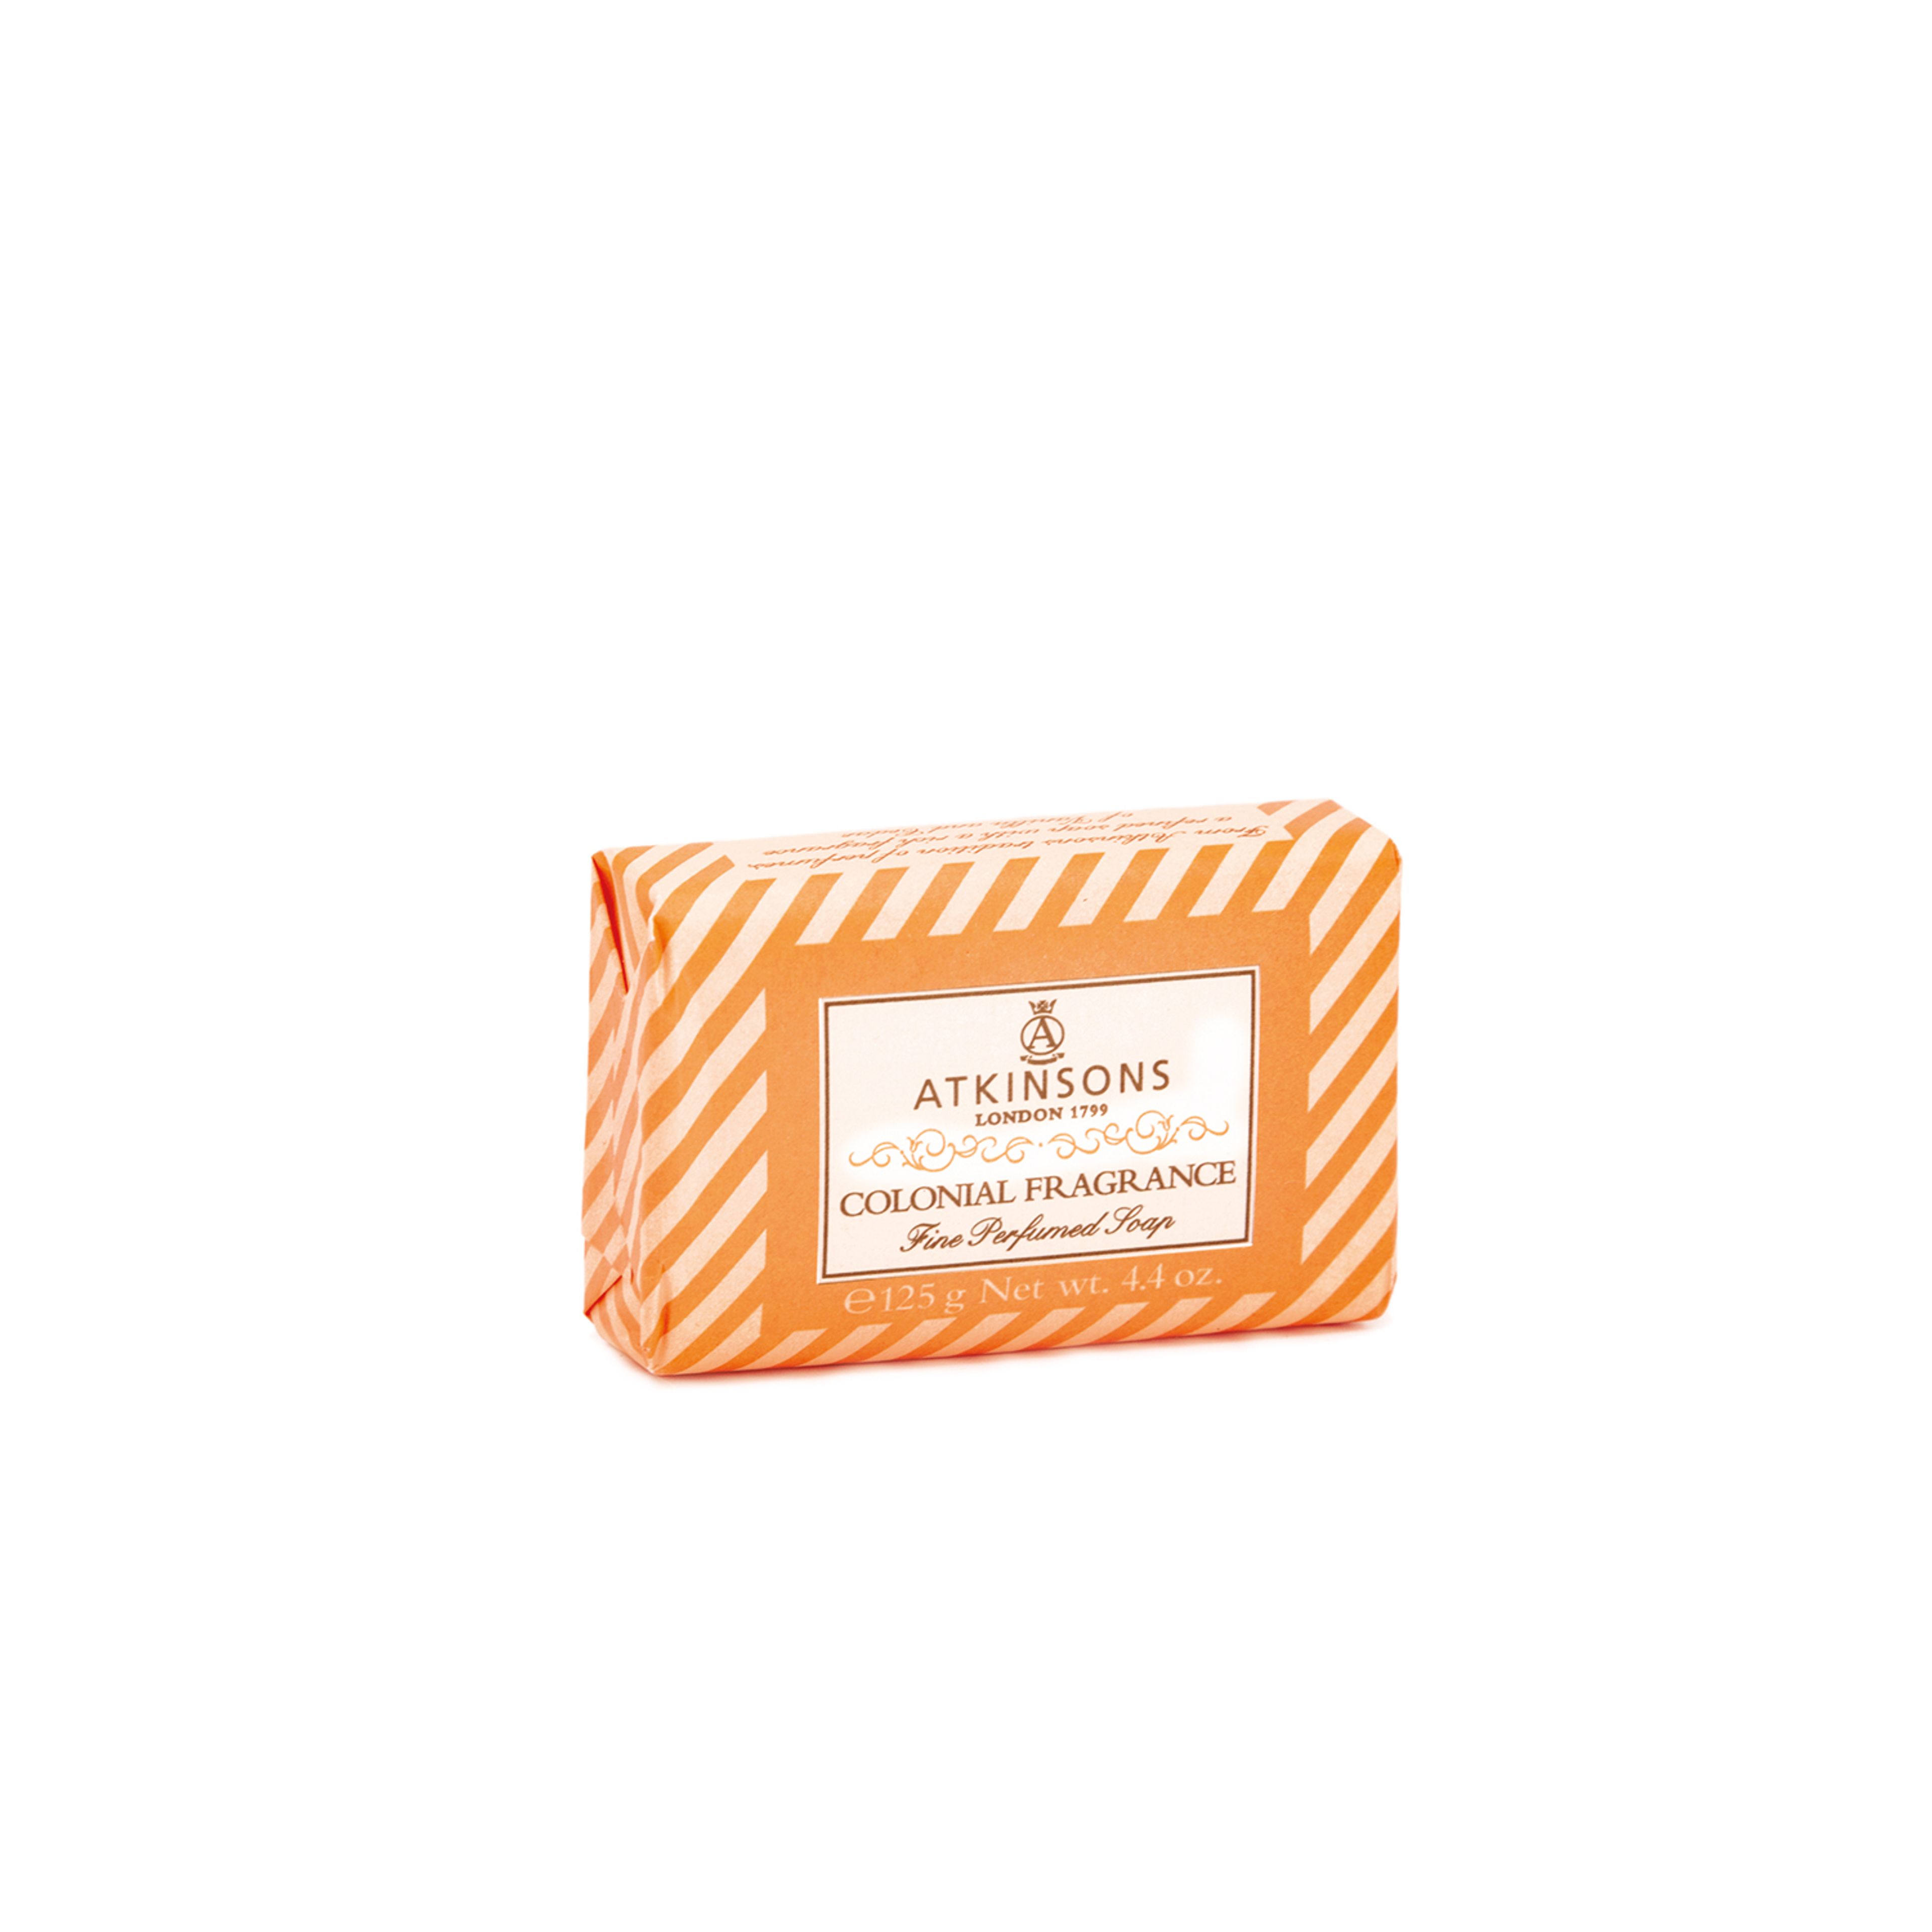 Atkinsons Fine Perfumed Soap-colonial Fragrance 1